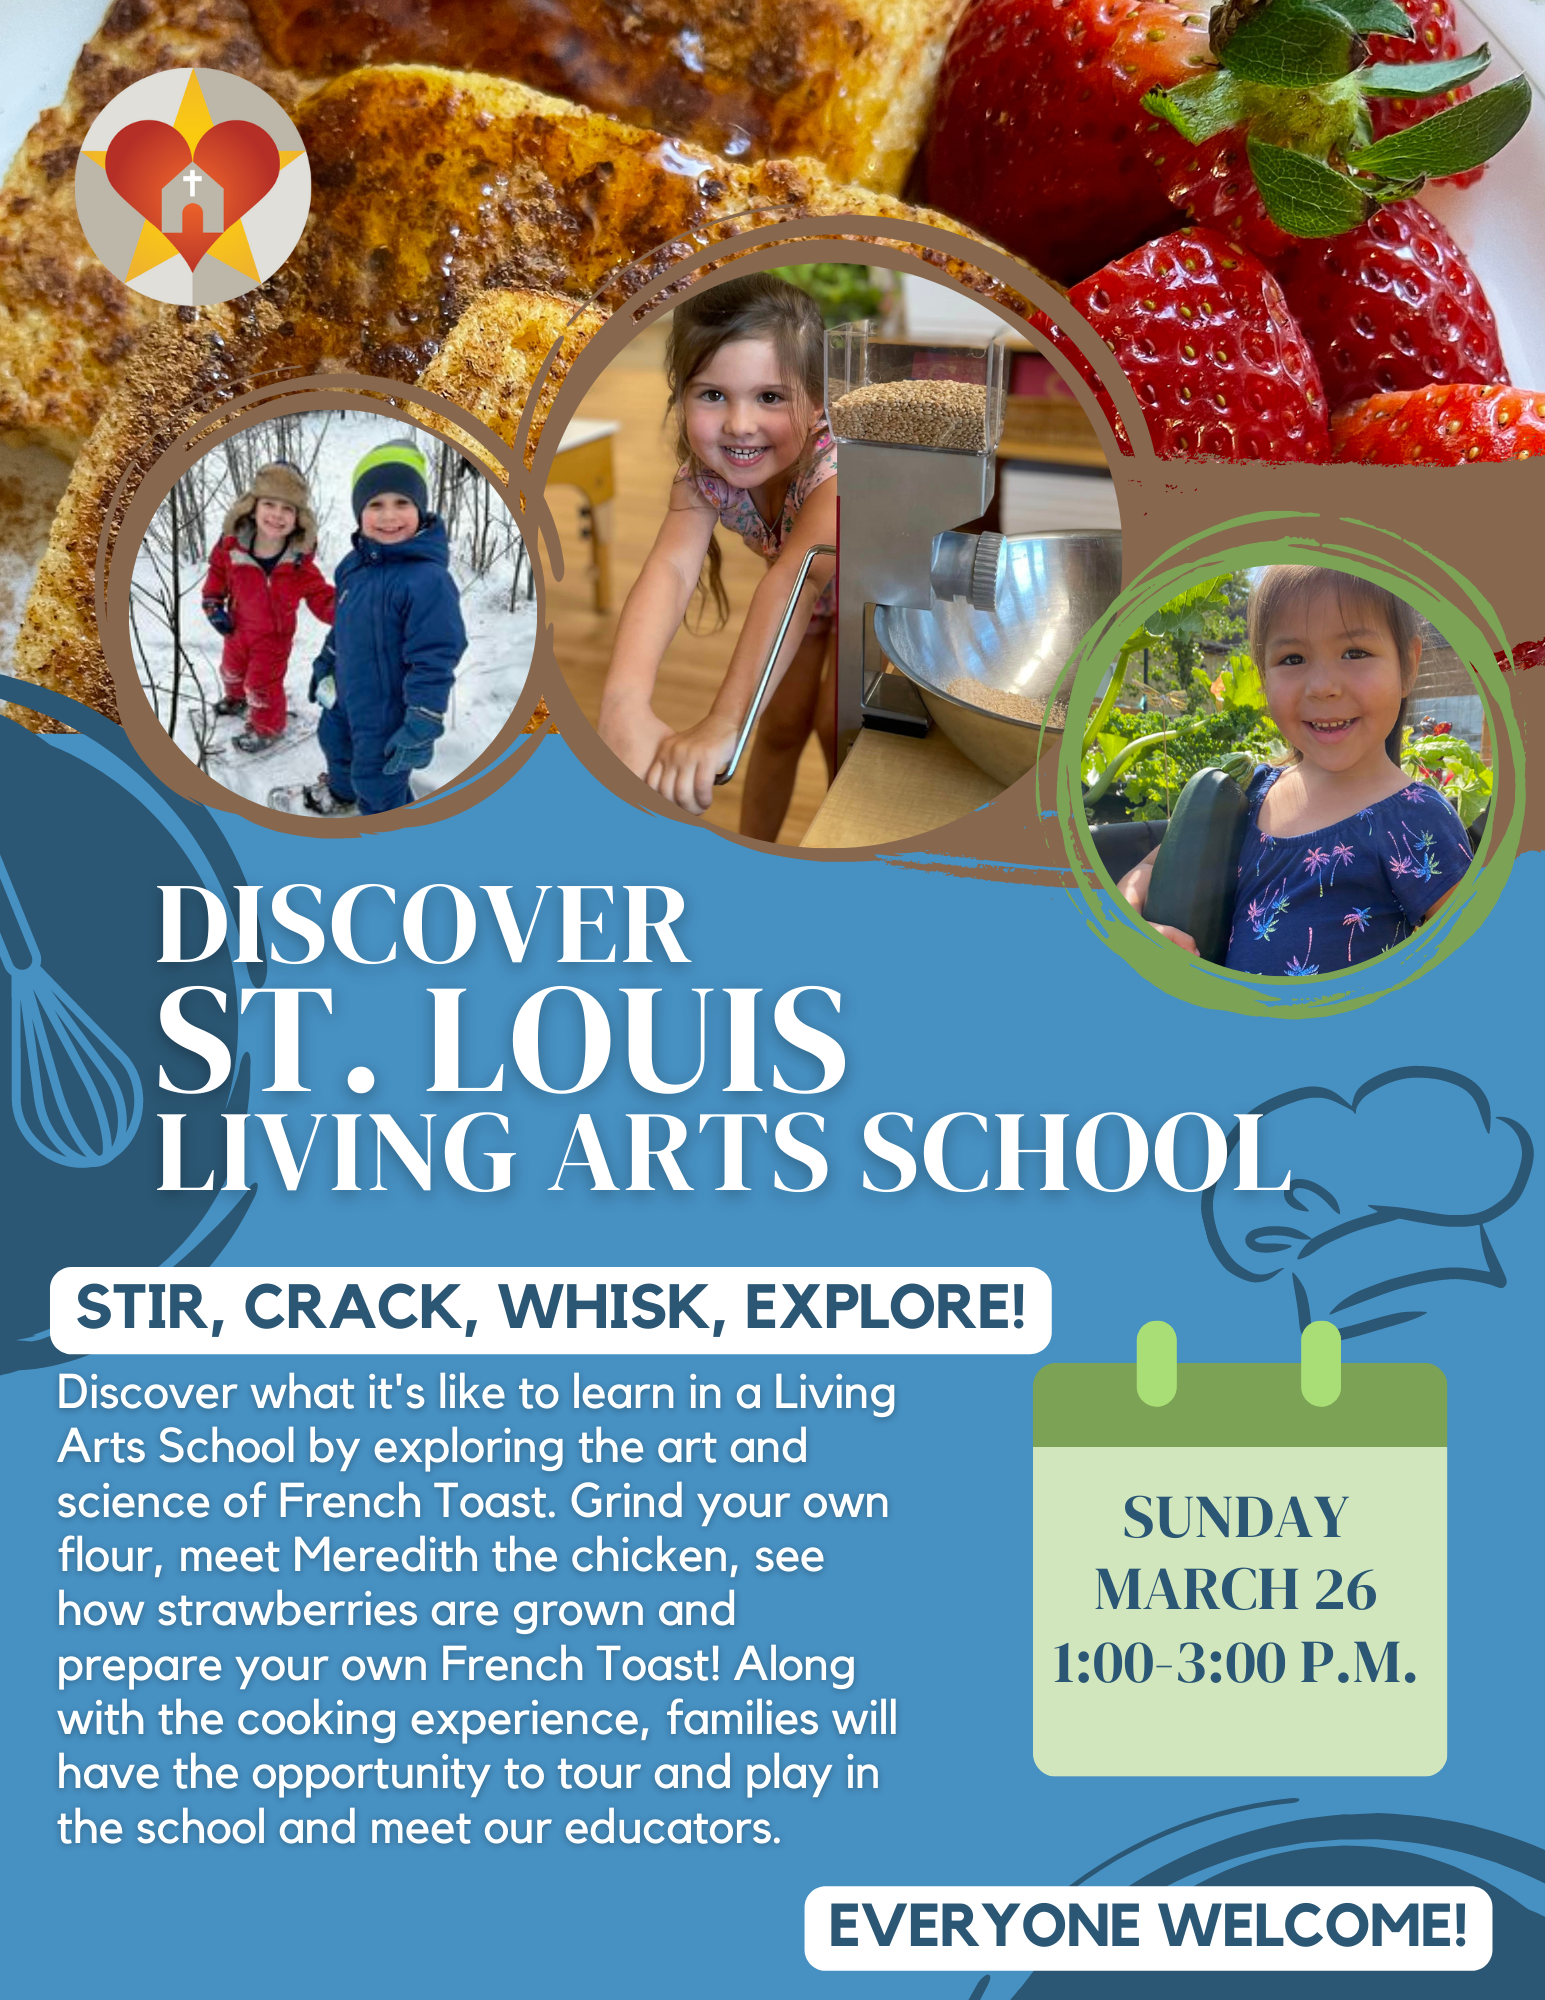 St. Louis School Kindergarten Welcome event is on Sunday, March 26th from 1:00-3:00 p.m. 